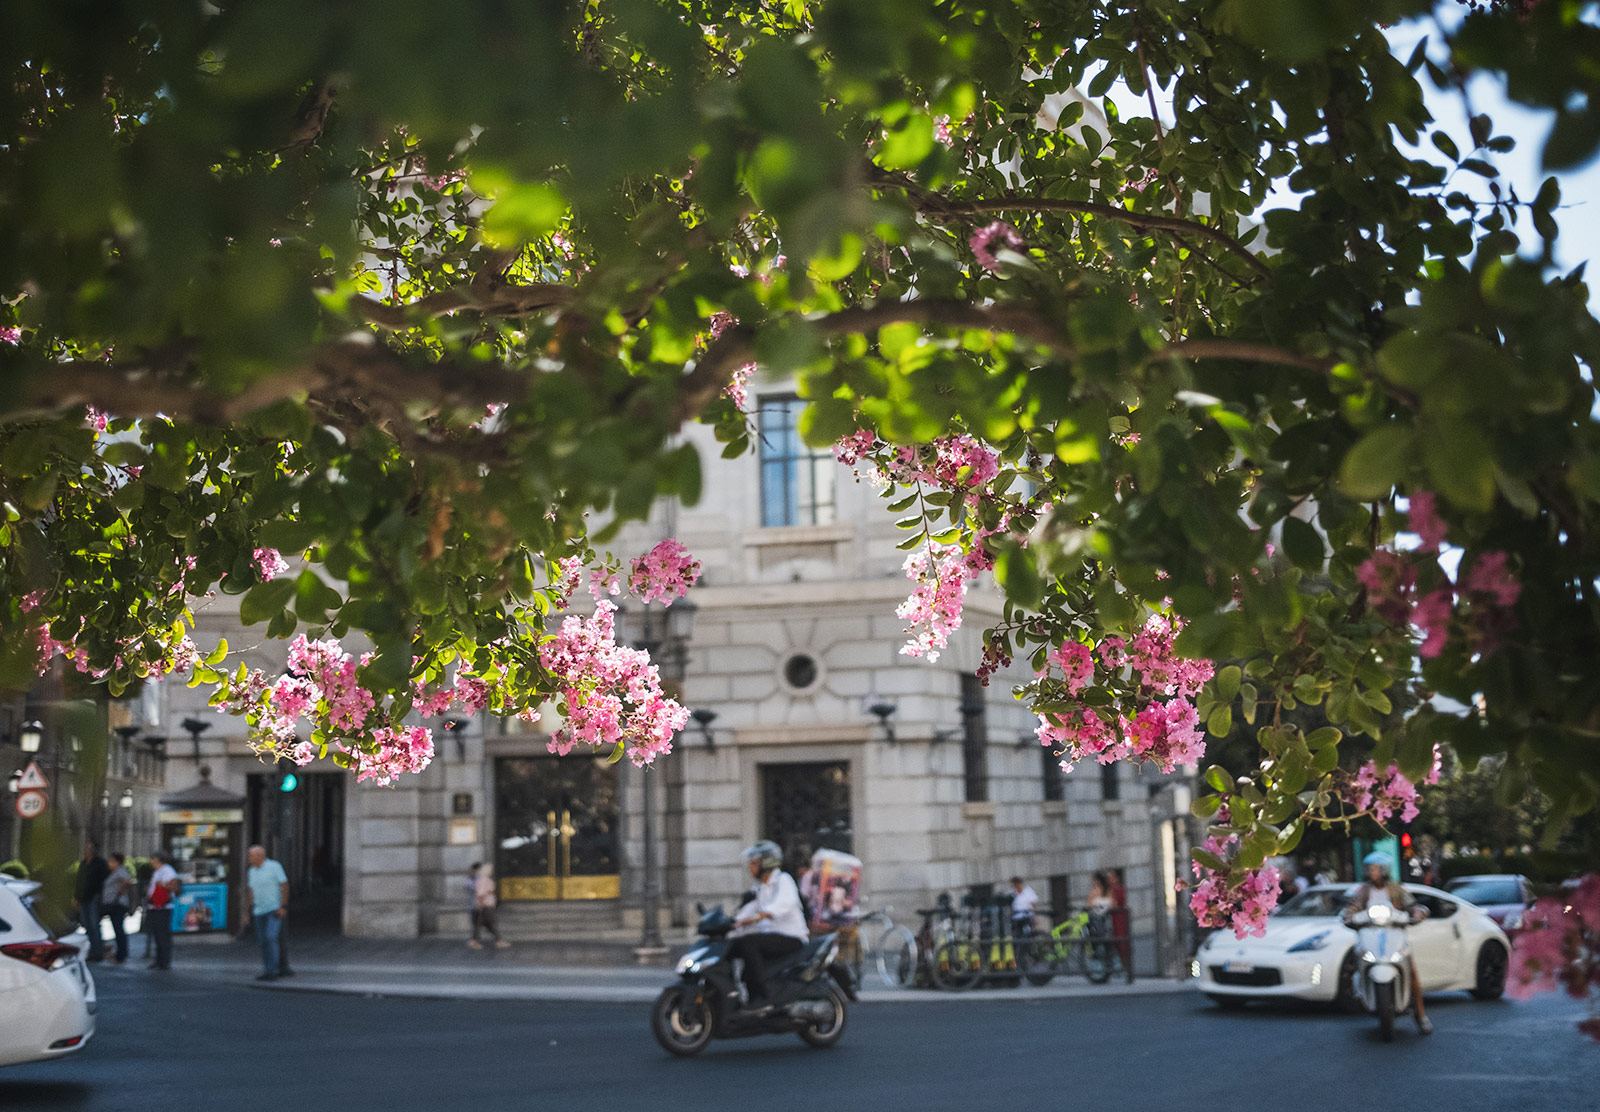 Man on moped framed by pink flowers